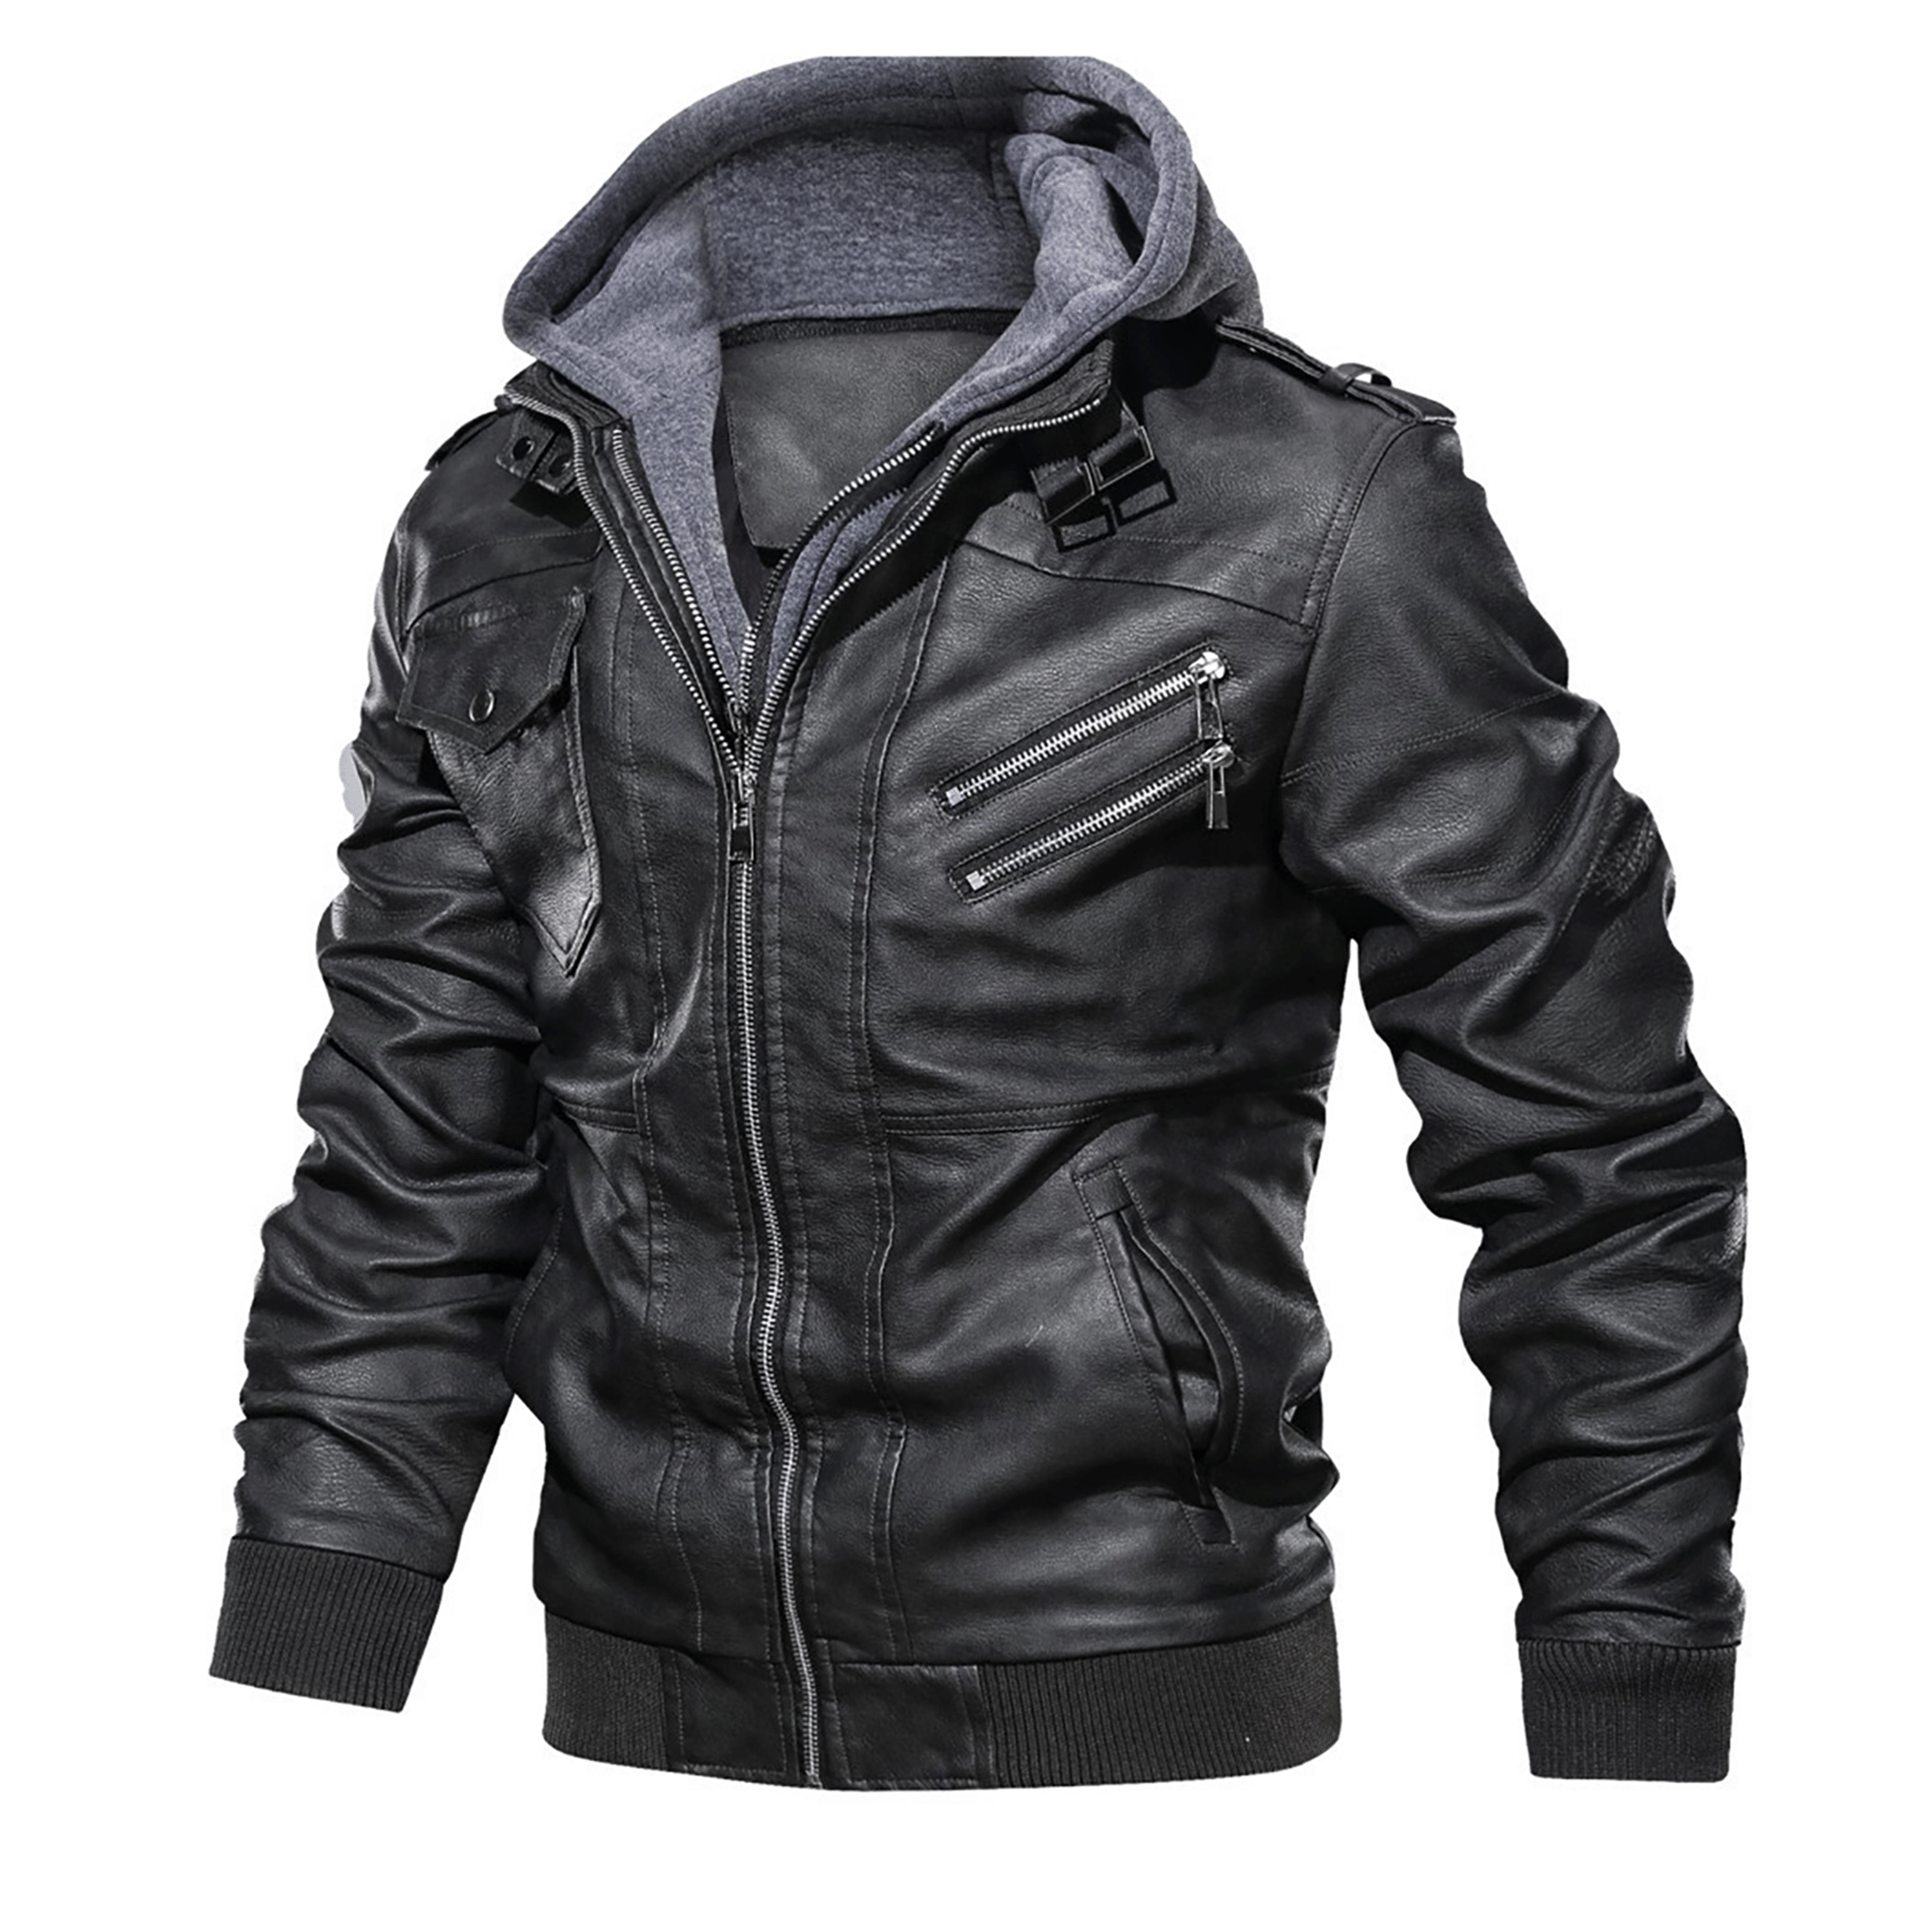 Top leather jackets and latest products 177